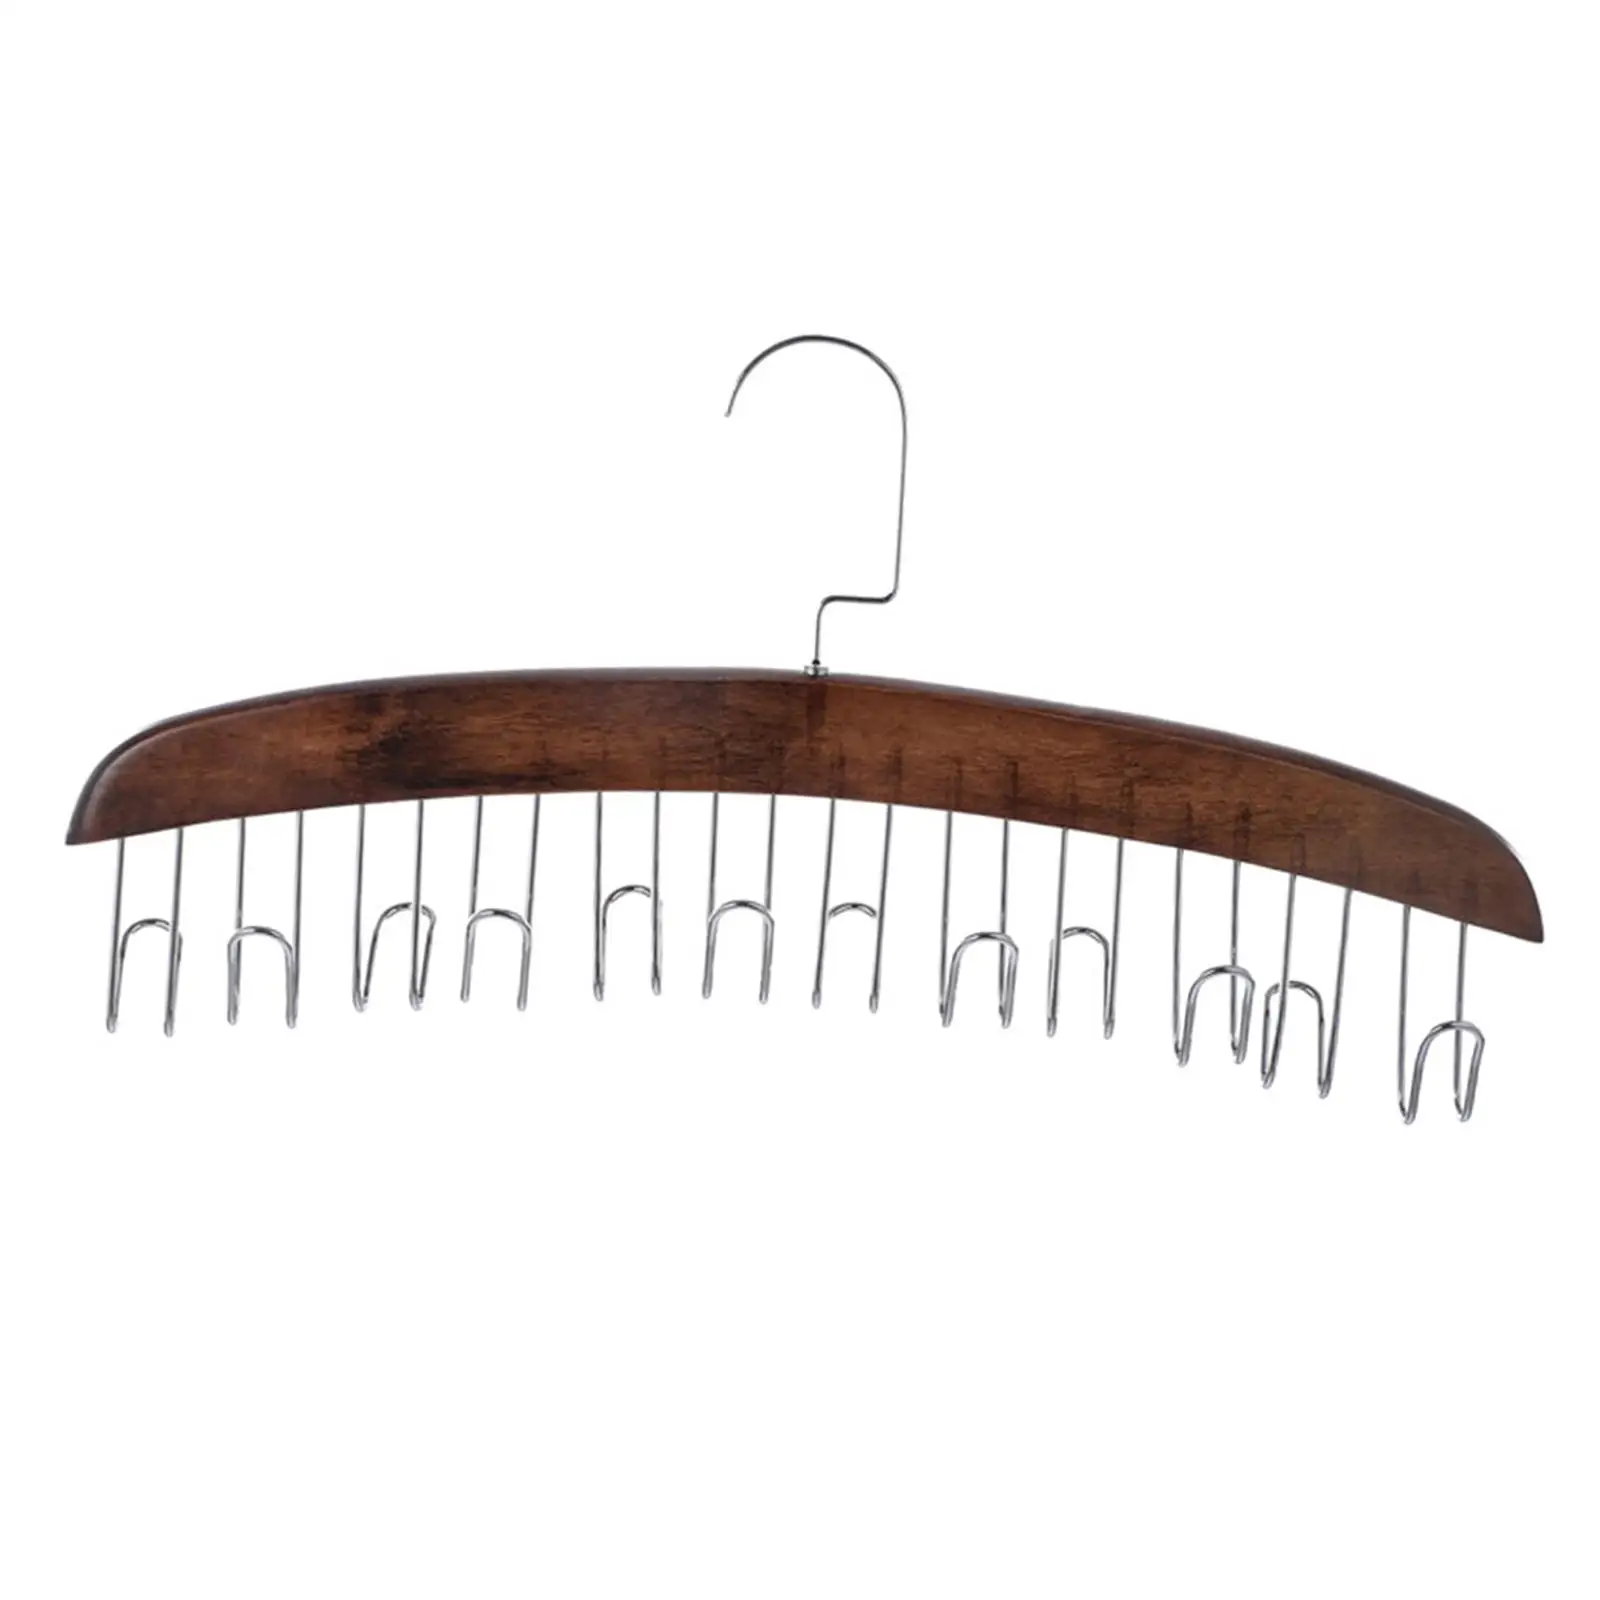 Wooden Tie Hangers Space Saving Closet Storage Hanging Organizer Hook with 12 Hooks for Bow Ties Hats Tank Tops Women